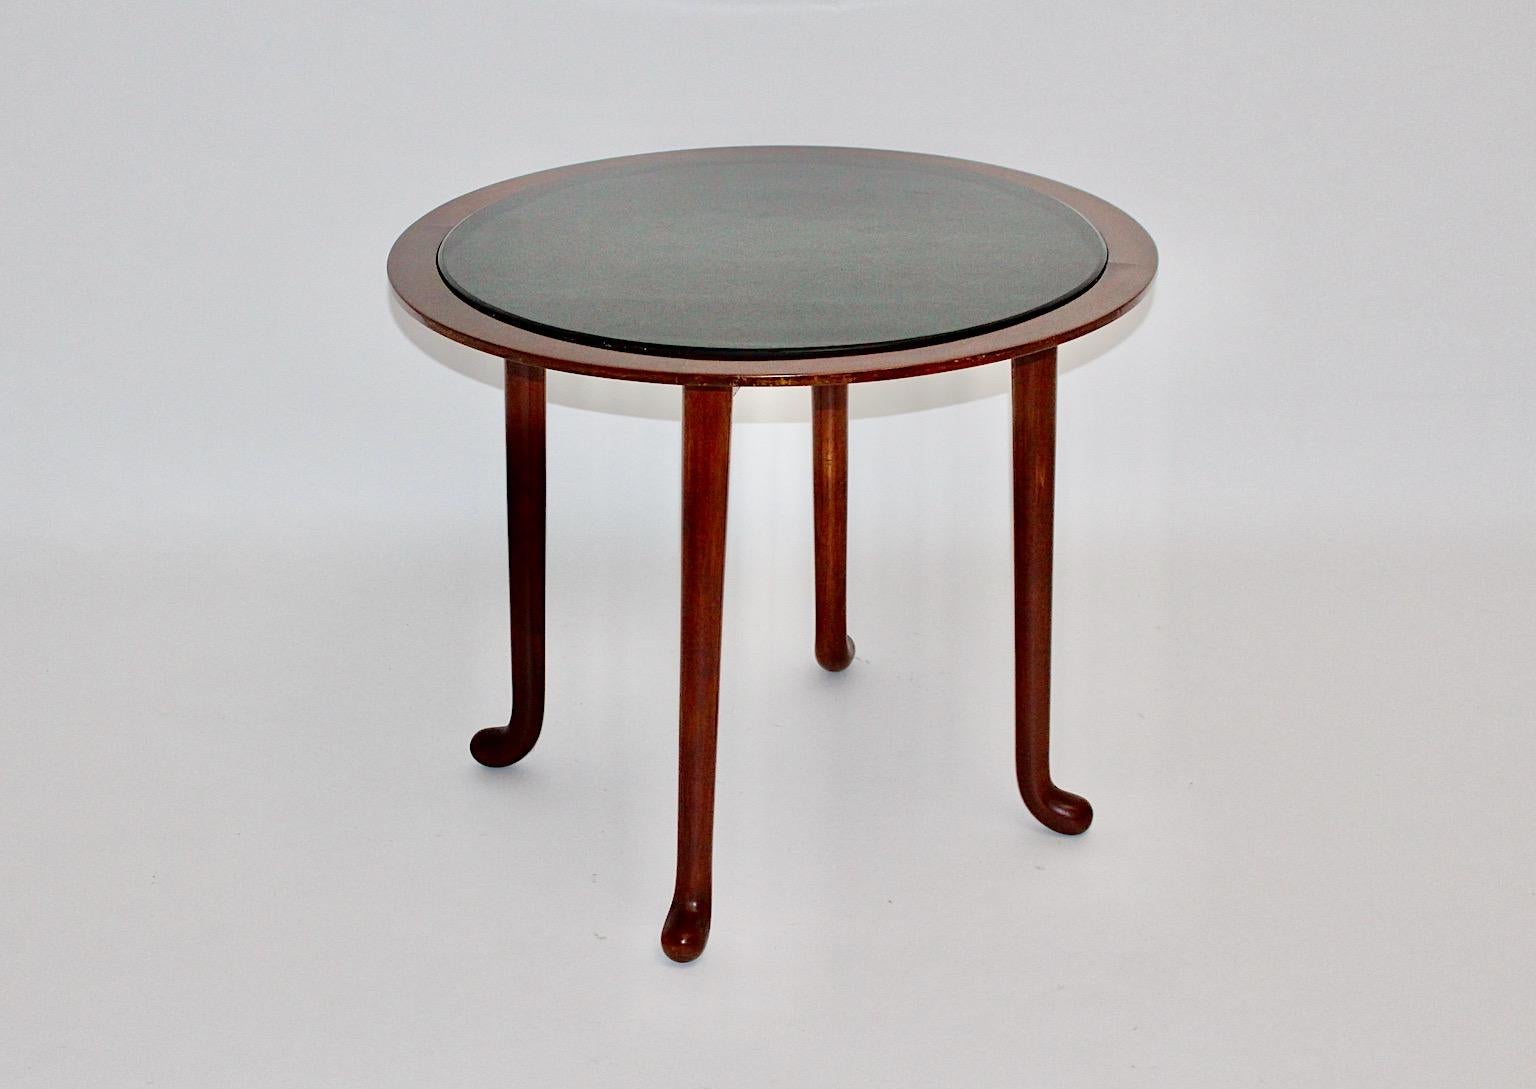 Art Deco era vintage circular side table or coffee table by Josef Frank circa 1925 Vienna from walnut veneer and solid walnut topped with an original removable black glass plate.
The authentic coffee table shows four feet with slightly curved ends